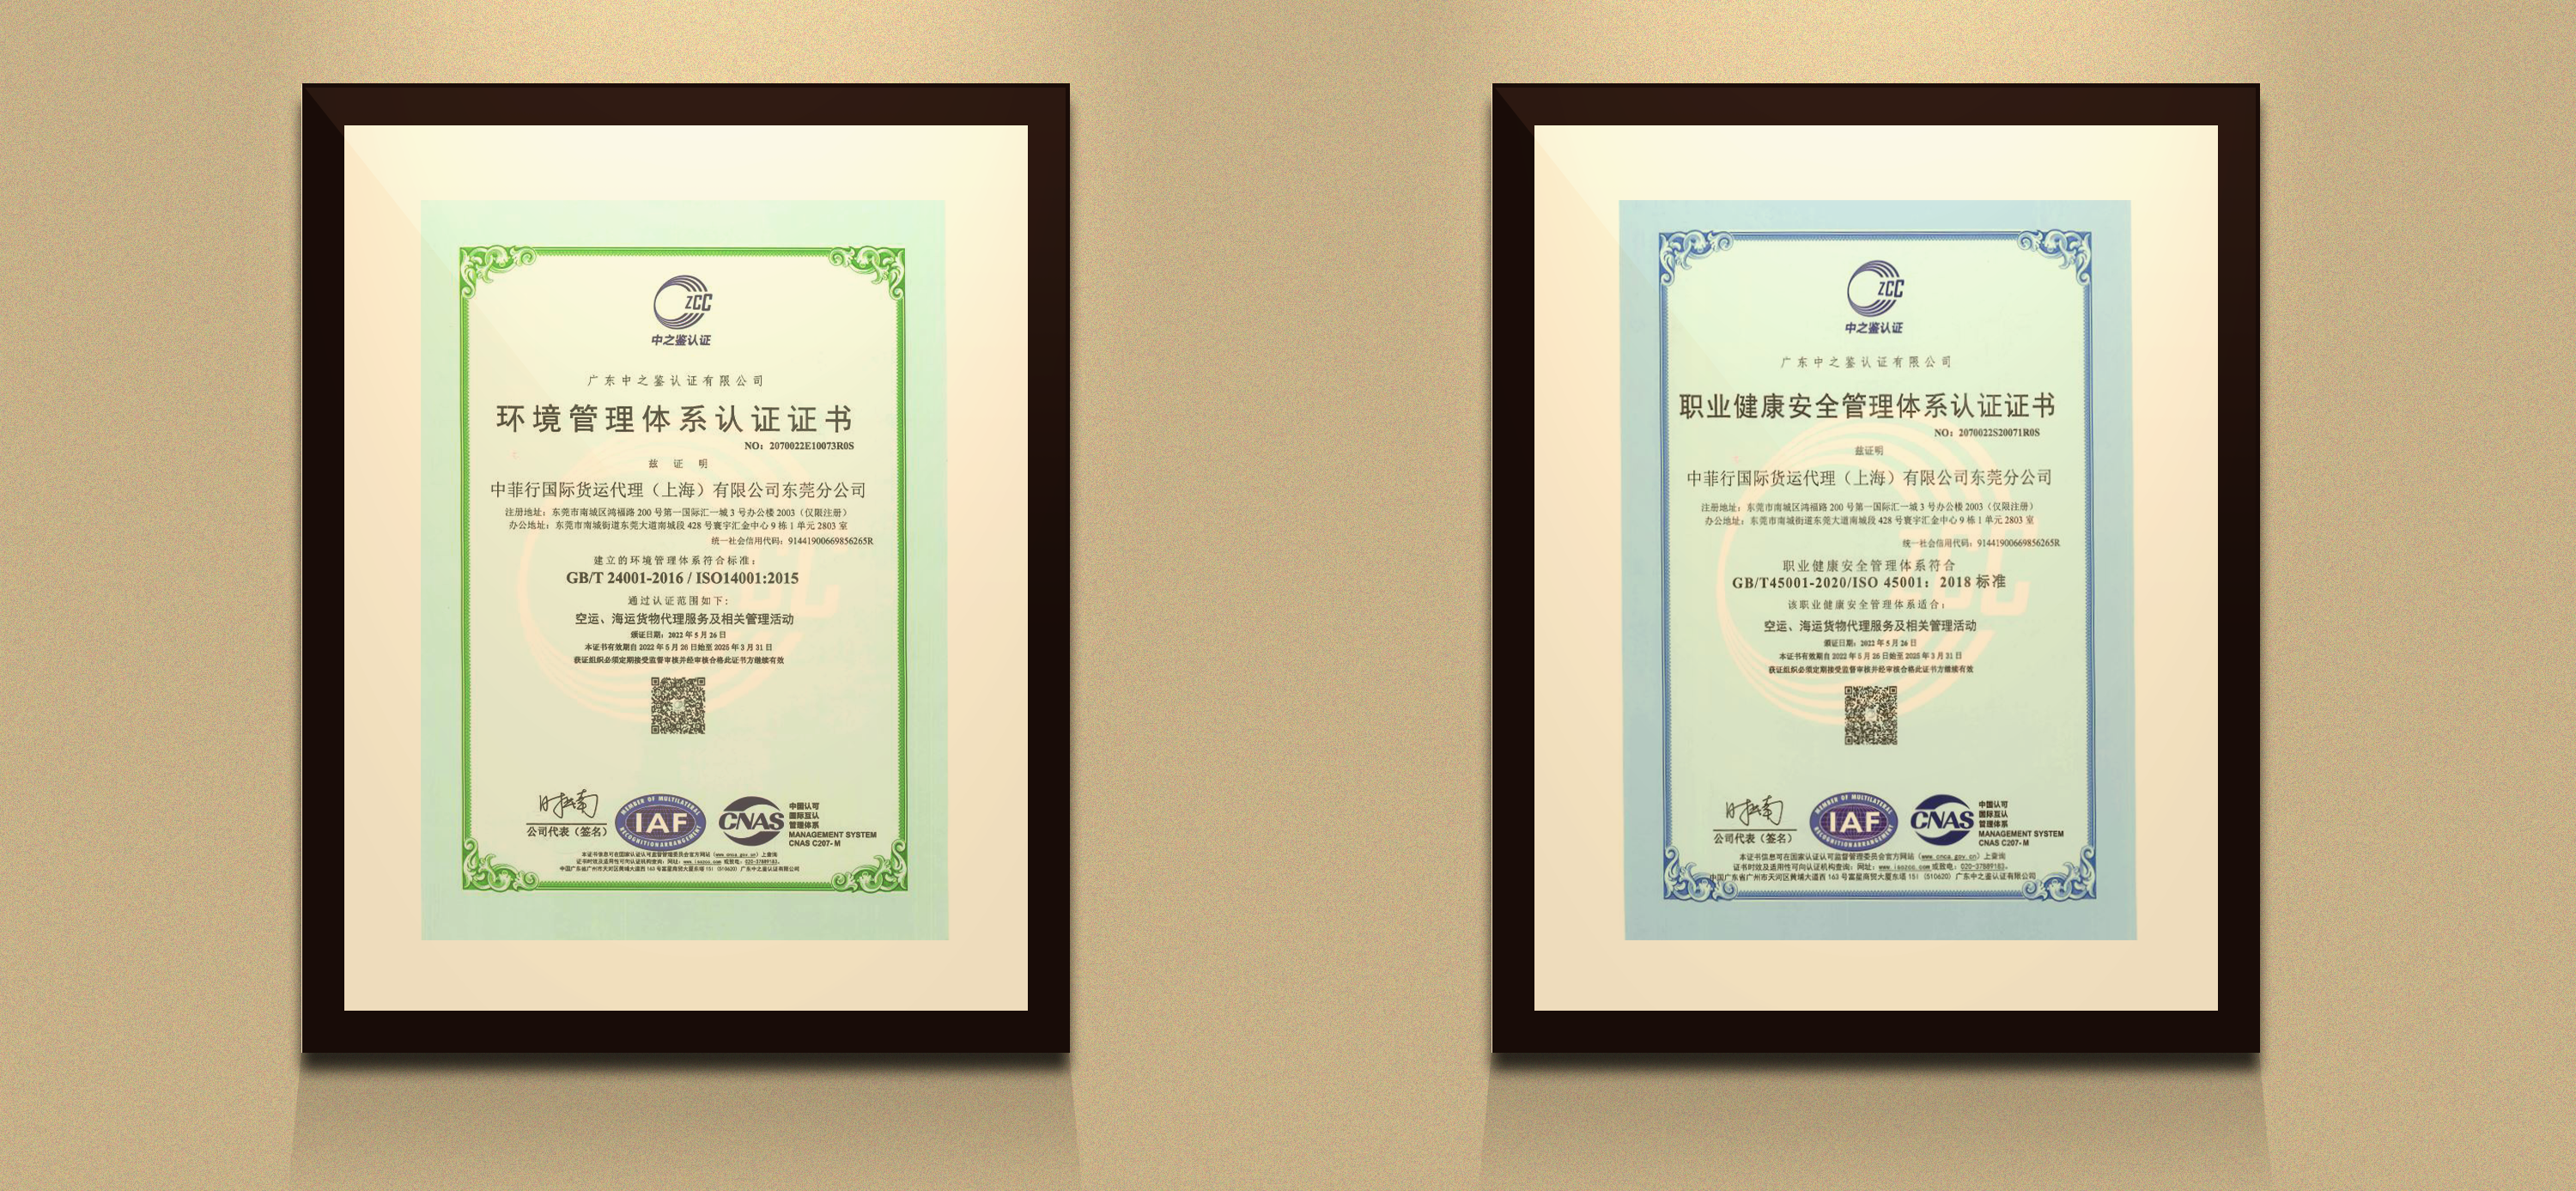 Dimerco recognized both ISO 14001 & ISO 45001 in China in Q2 2022_CN